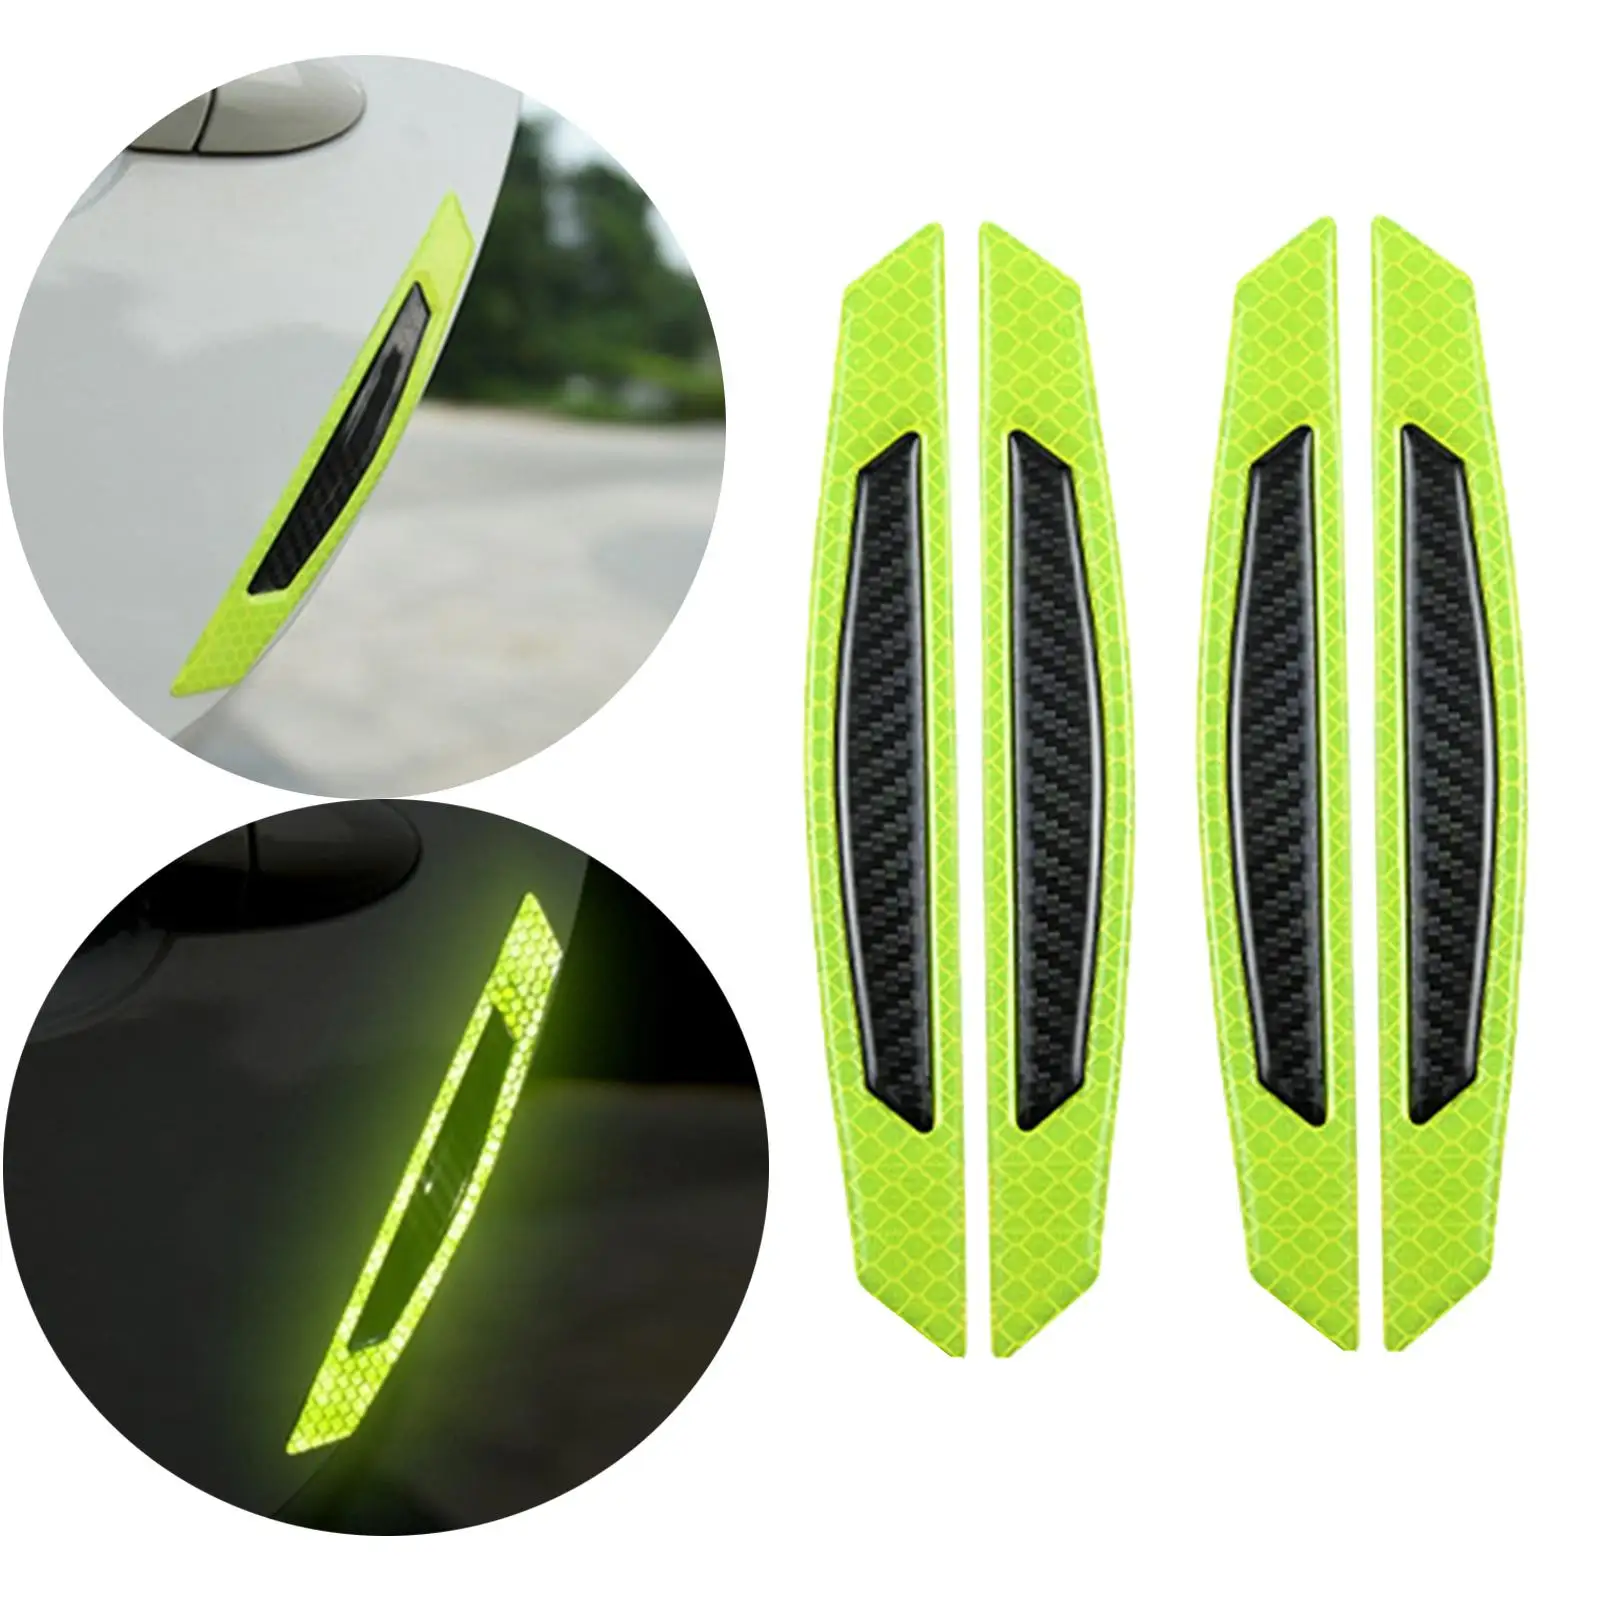 4 Pieces/ Reflective Stickers Car Door Side Sticker Decal Warning Tape Reflective Strips